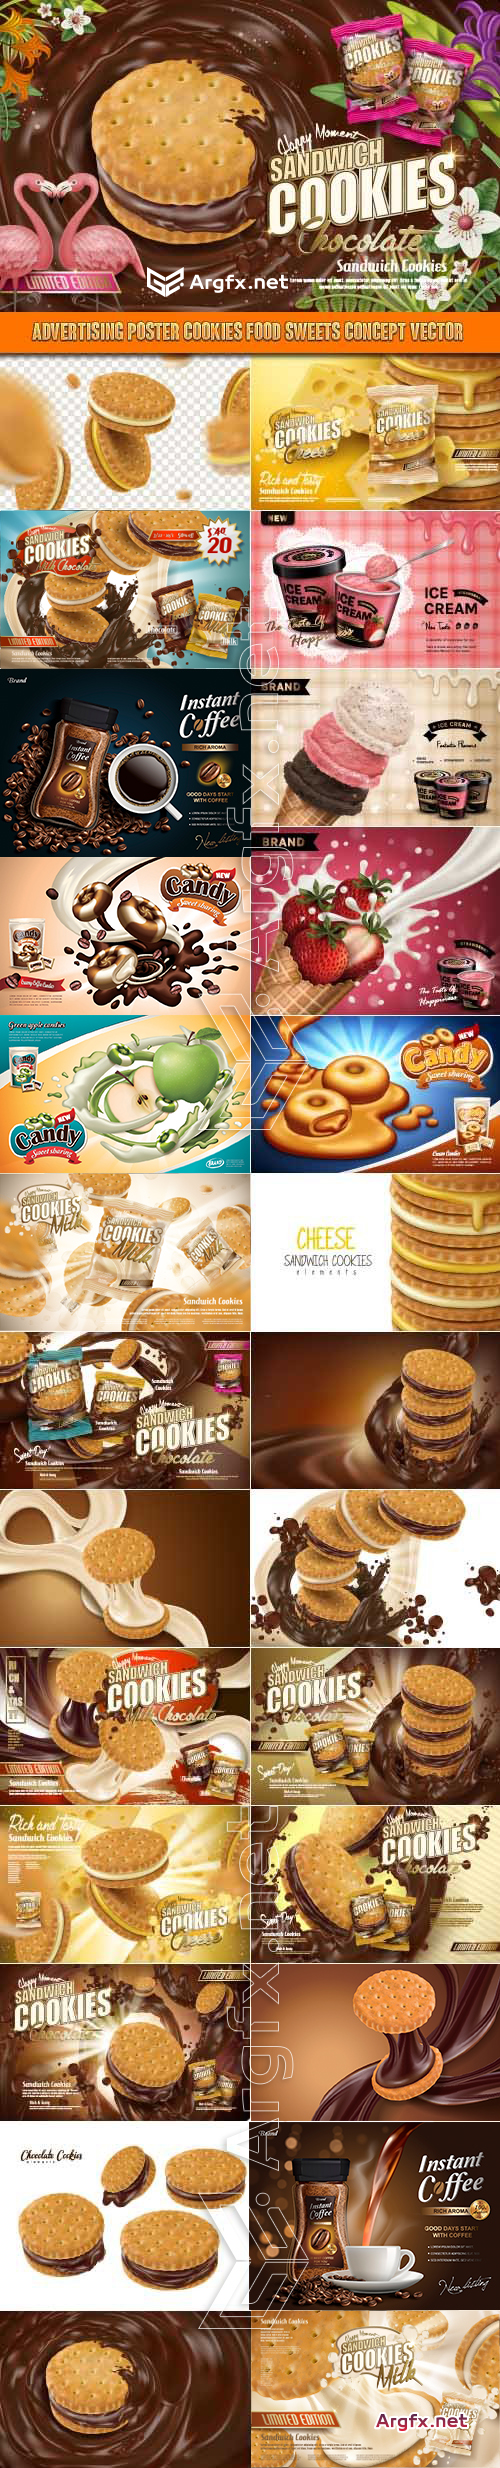 Advertising Poster Cookies food sweets Concept vector